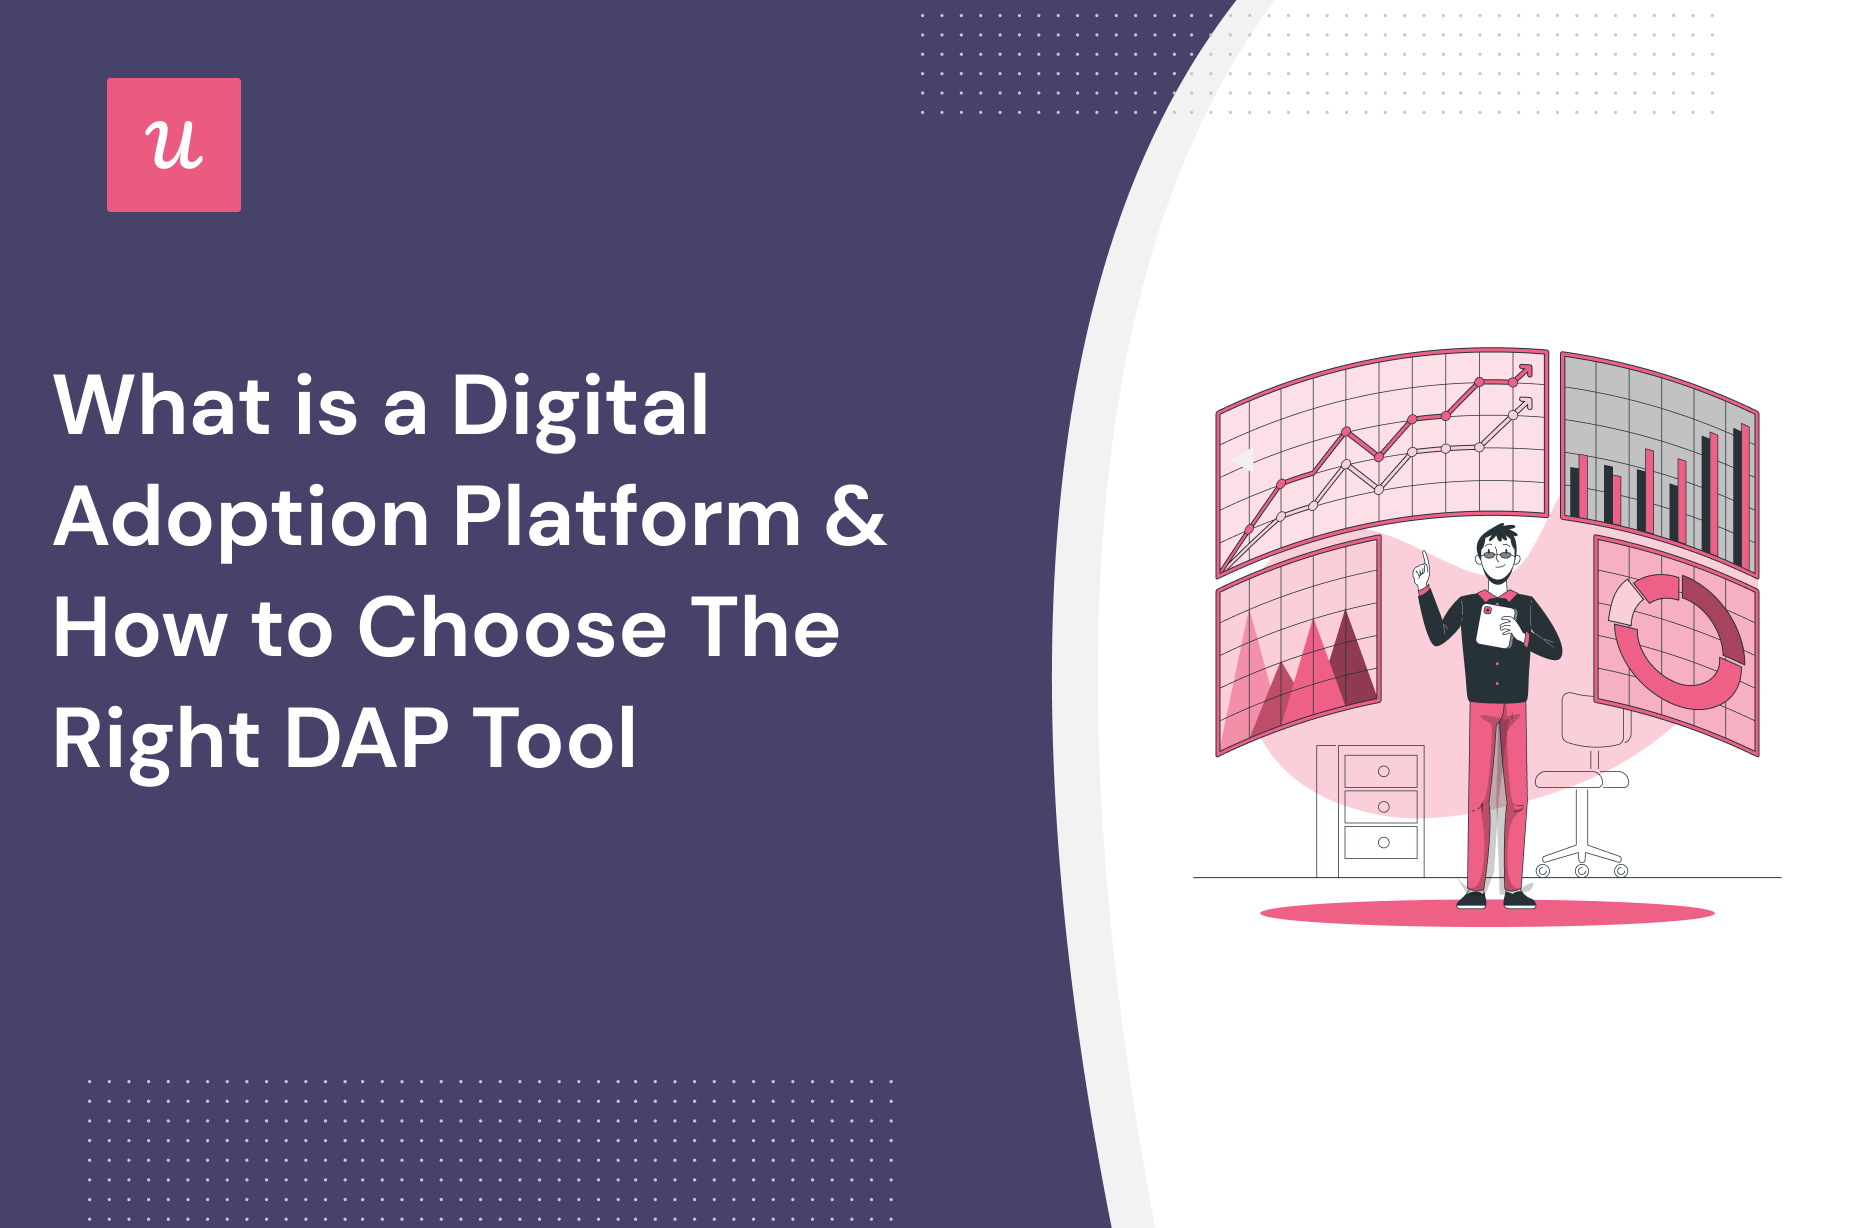 What is a Digital Adoption Platform and How to Choose The Right DAP Tool